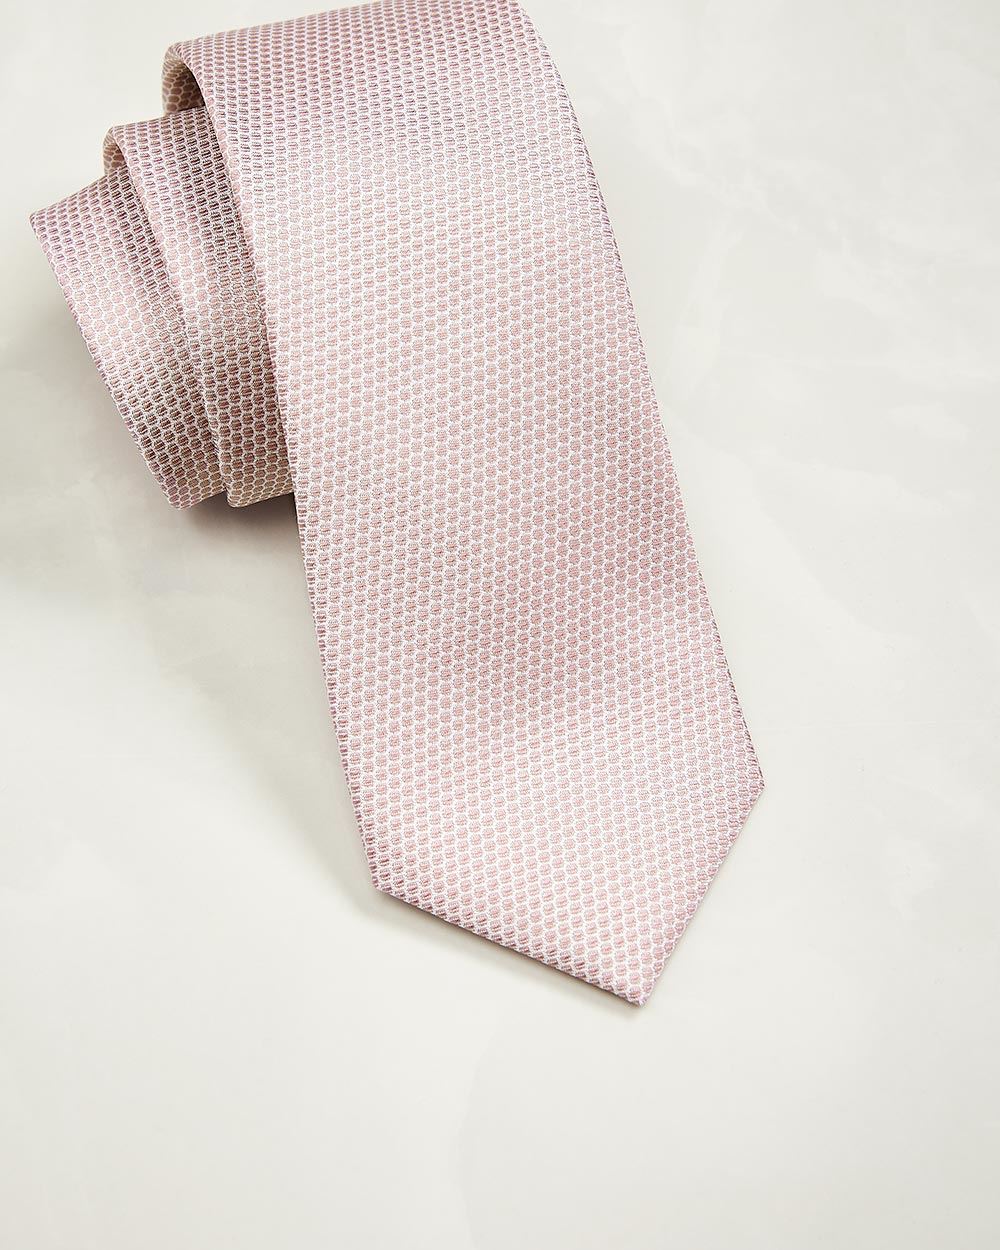 Wide dotted light pink tie | RW&CO.